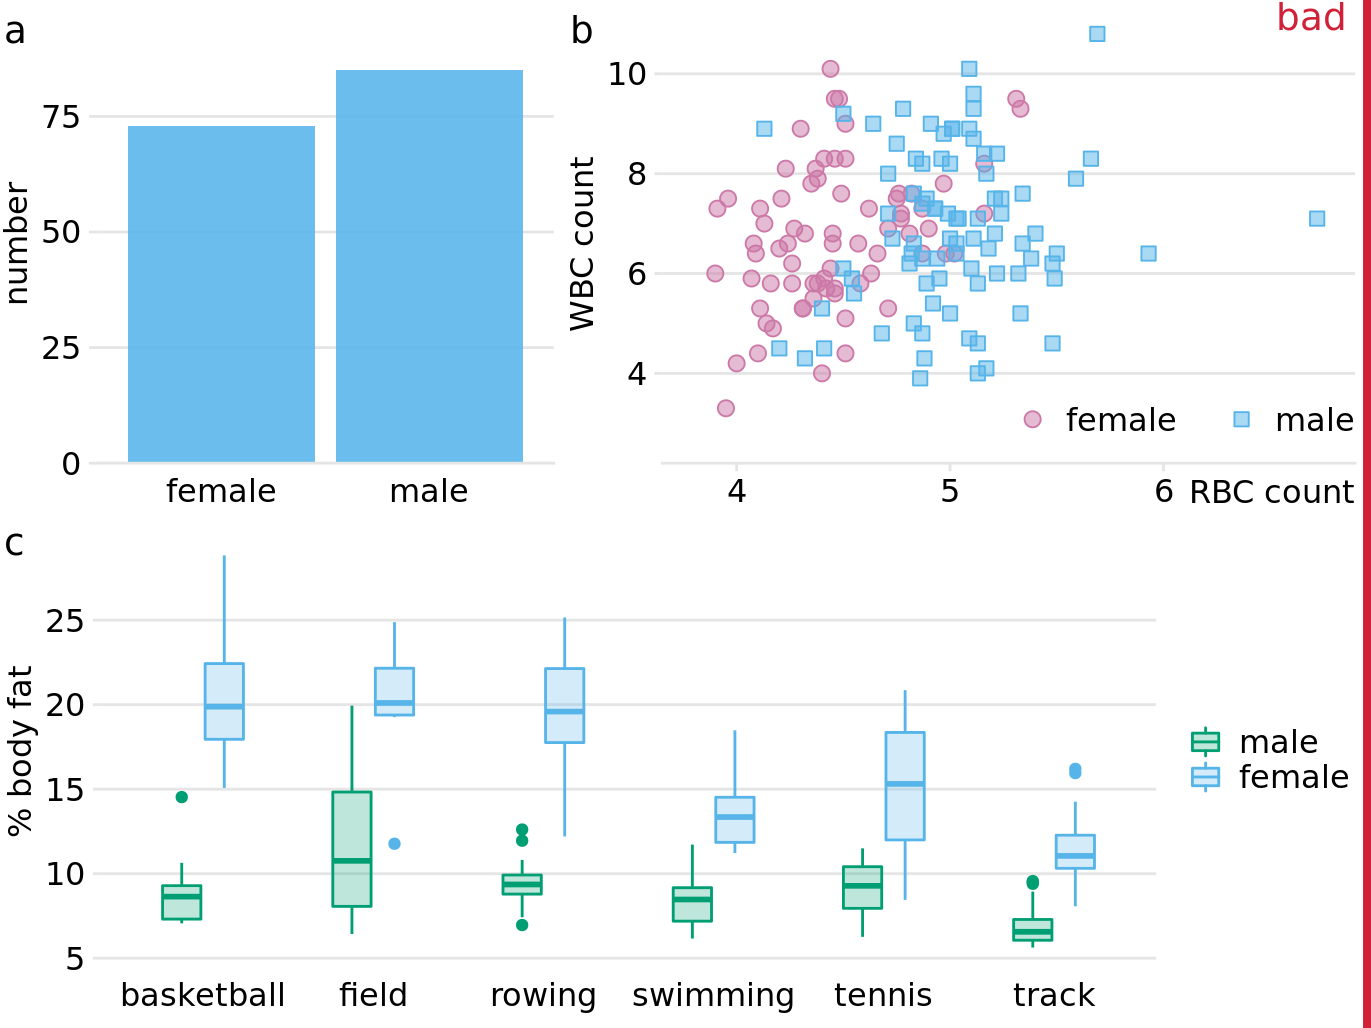 Physiology and body-composition of male and female athletes. (a) The data set encompasses 73 female and 85 male professional athletes. (b) Male athletes tend to have higher red blood cell (RBC, reported in units of \(10^{12}\) per liter) counts than female athletes, but there are no such differences for white blood cell counts (WBC, reported in units of \(10^{9}\) per liter). (c) Male athletes tend to have a lower body fat percentage than female athletes performing in the same sport. Data source: Telford and Cunningham (1991)